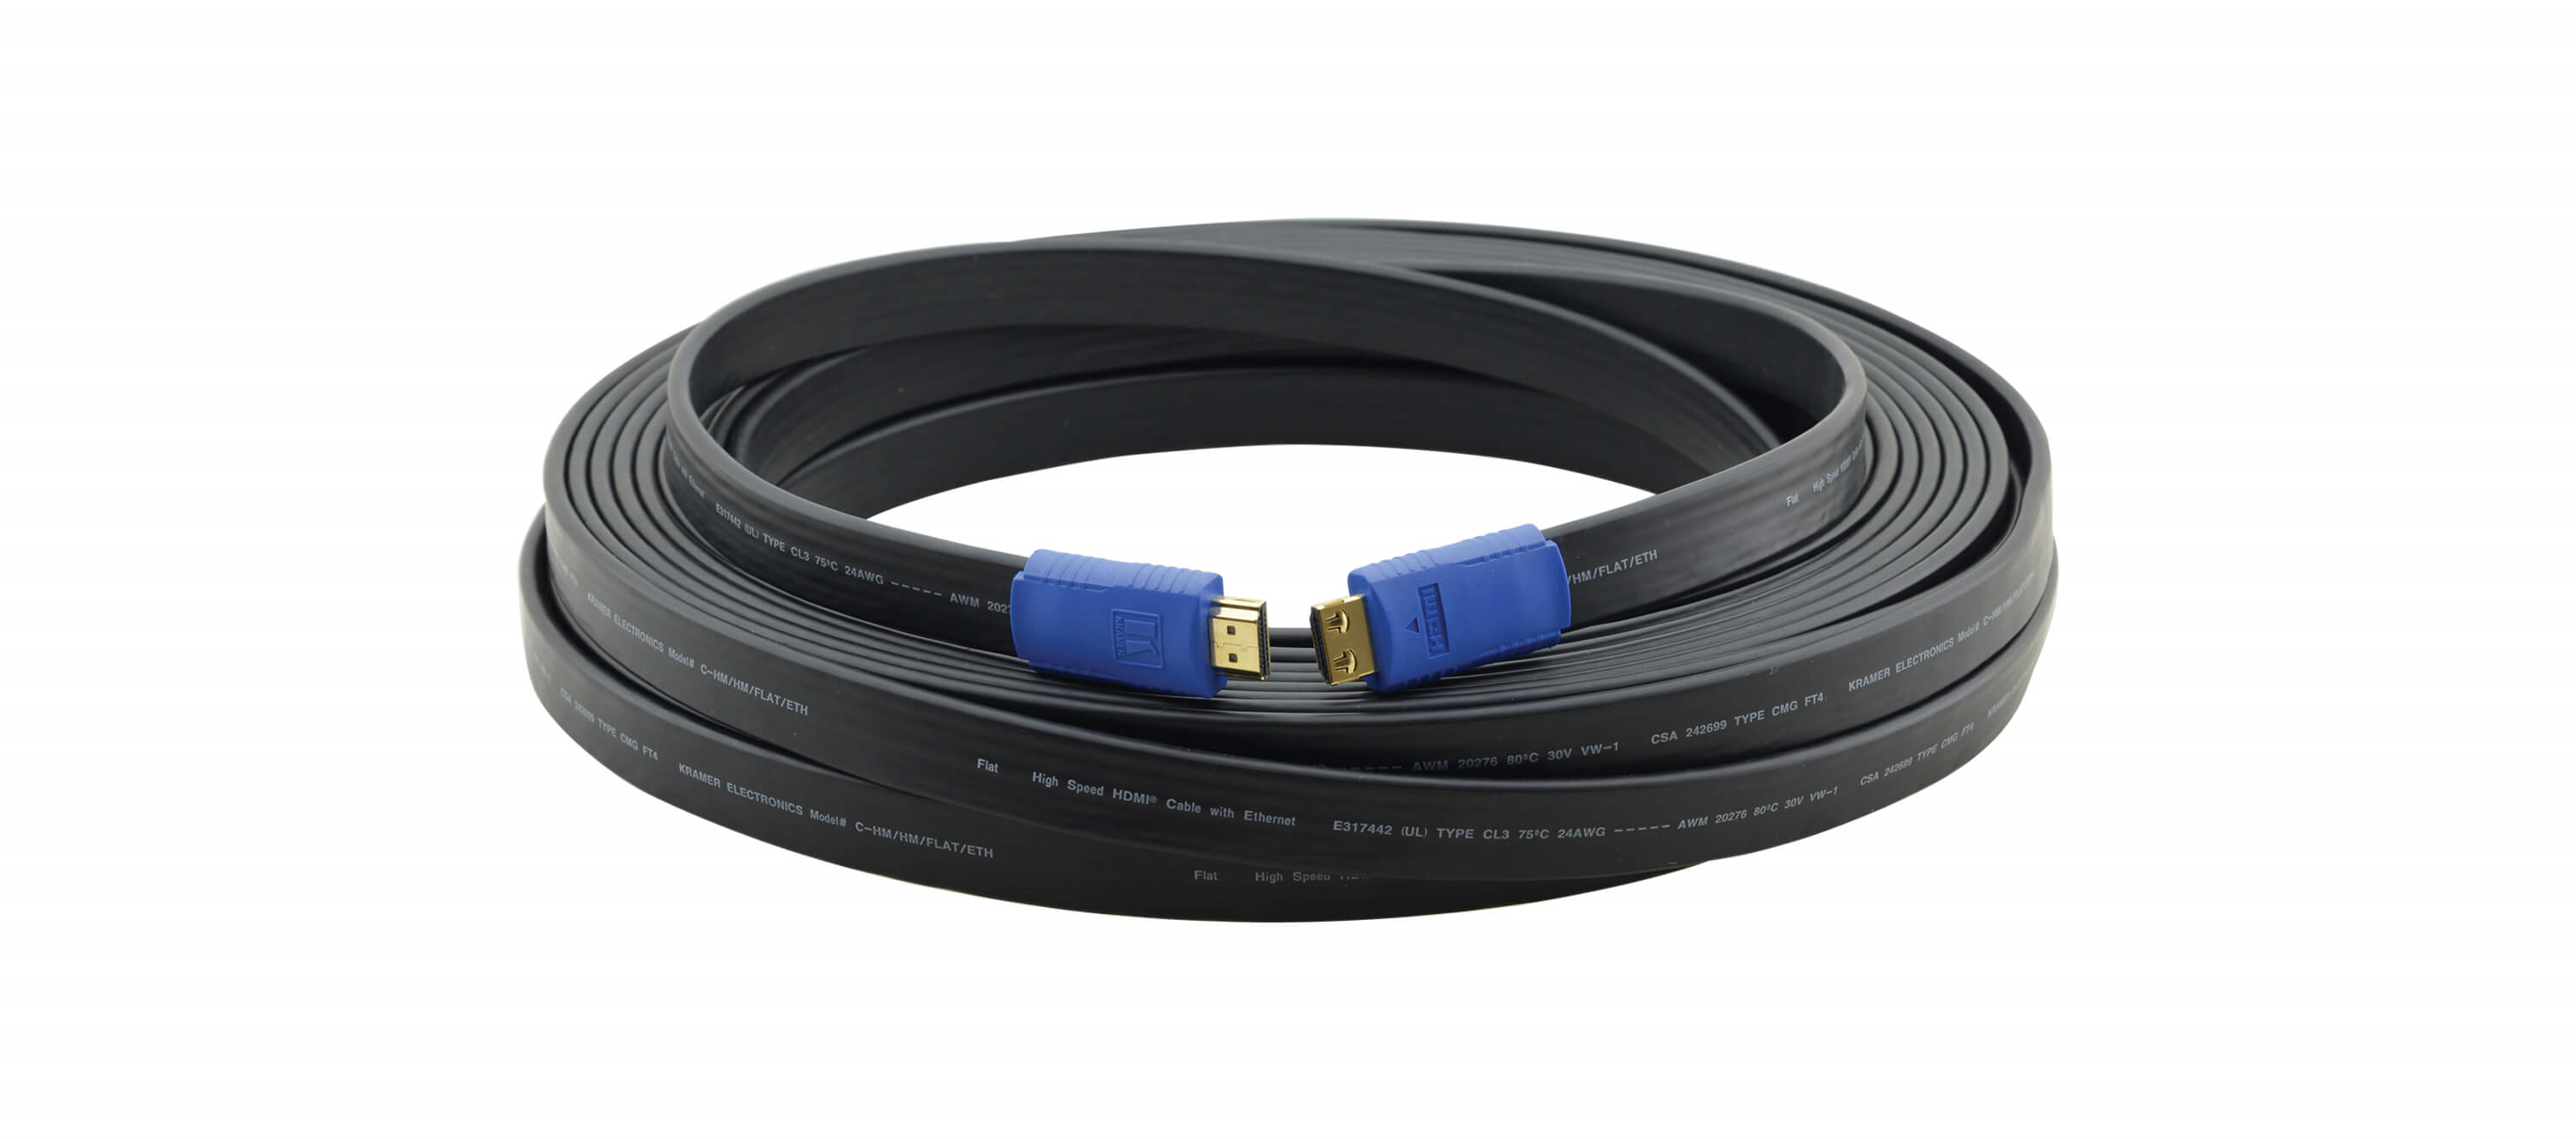 C-HM/HM/FLAT/ETH-50 Flat High–Speed HDMI Cable with Ethernet